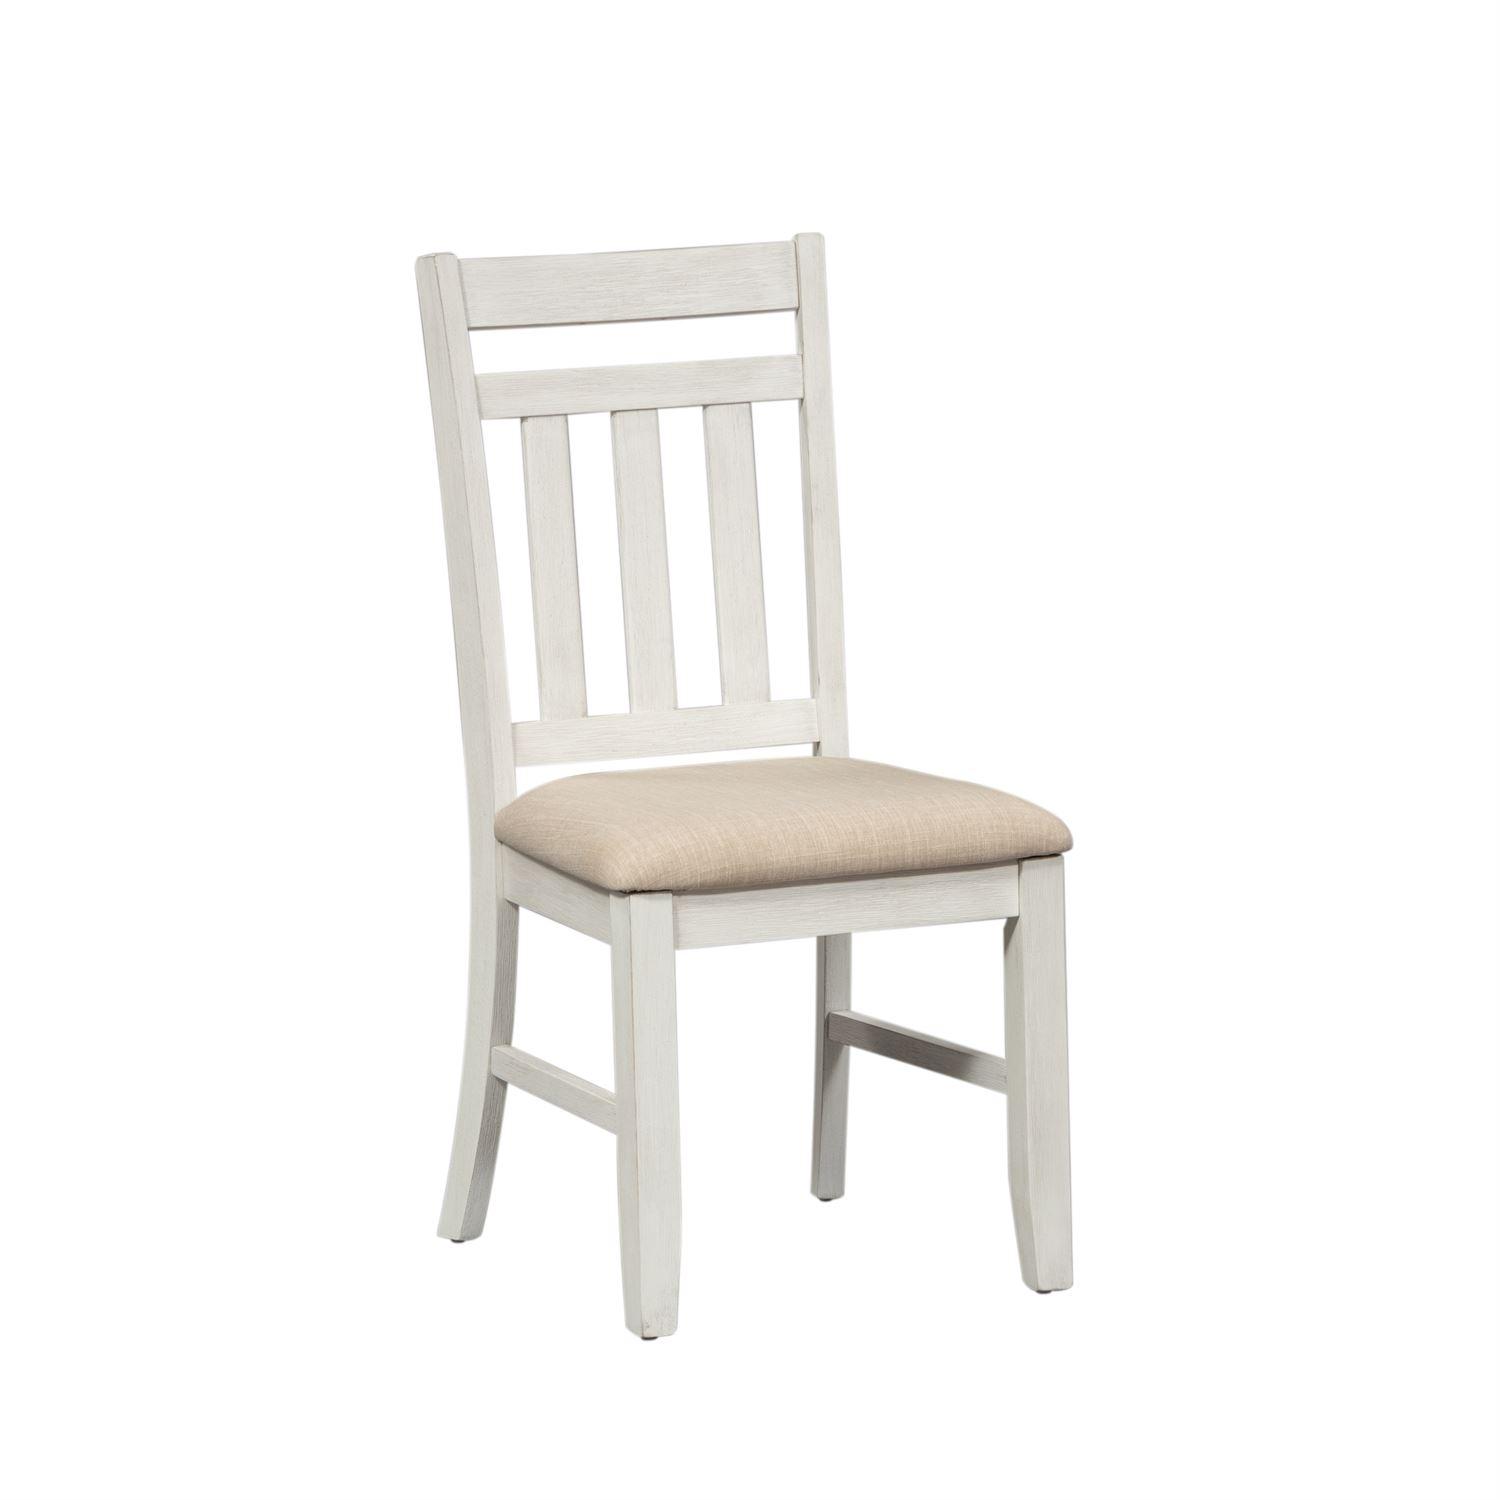 Traditional Dining Side Chair Summerville  (171-CD) Dining Side Chair 171-C1501S-2PC in Cream, White Linen